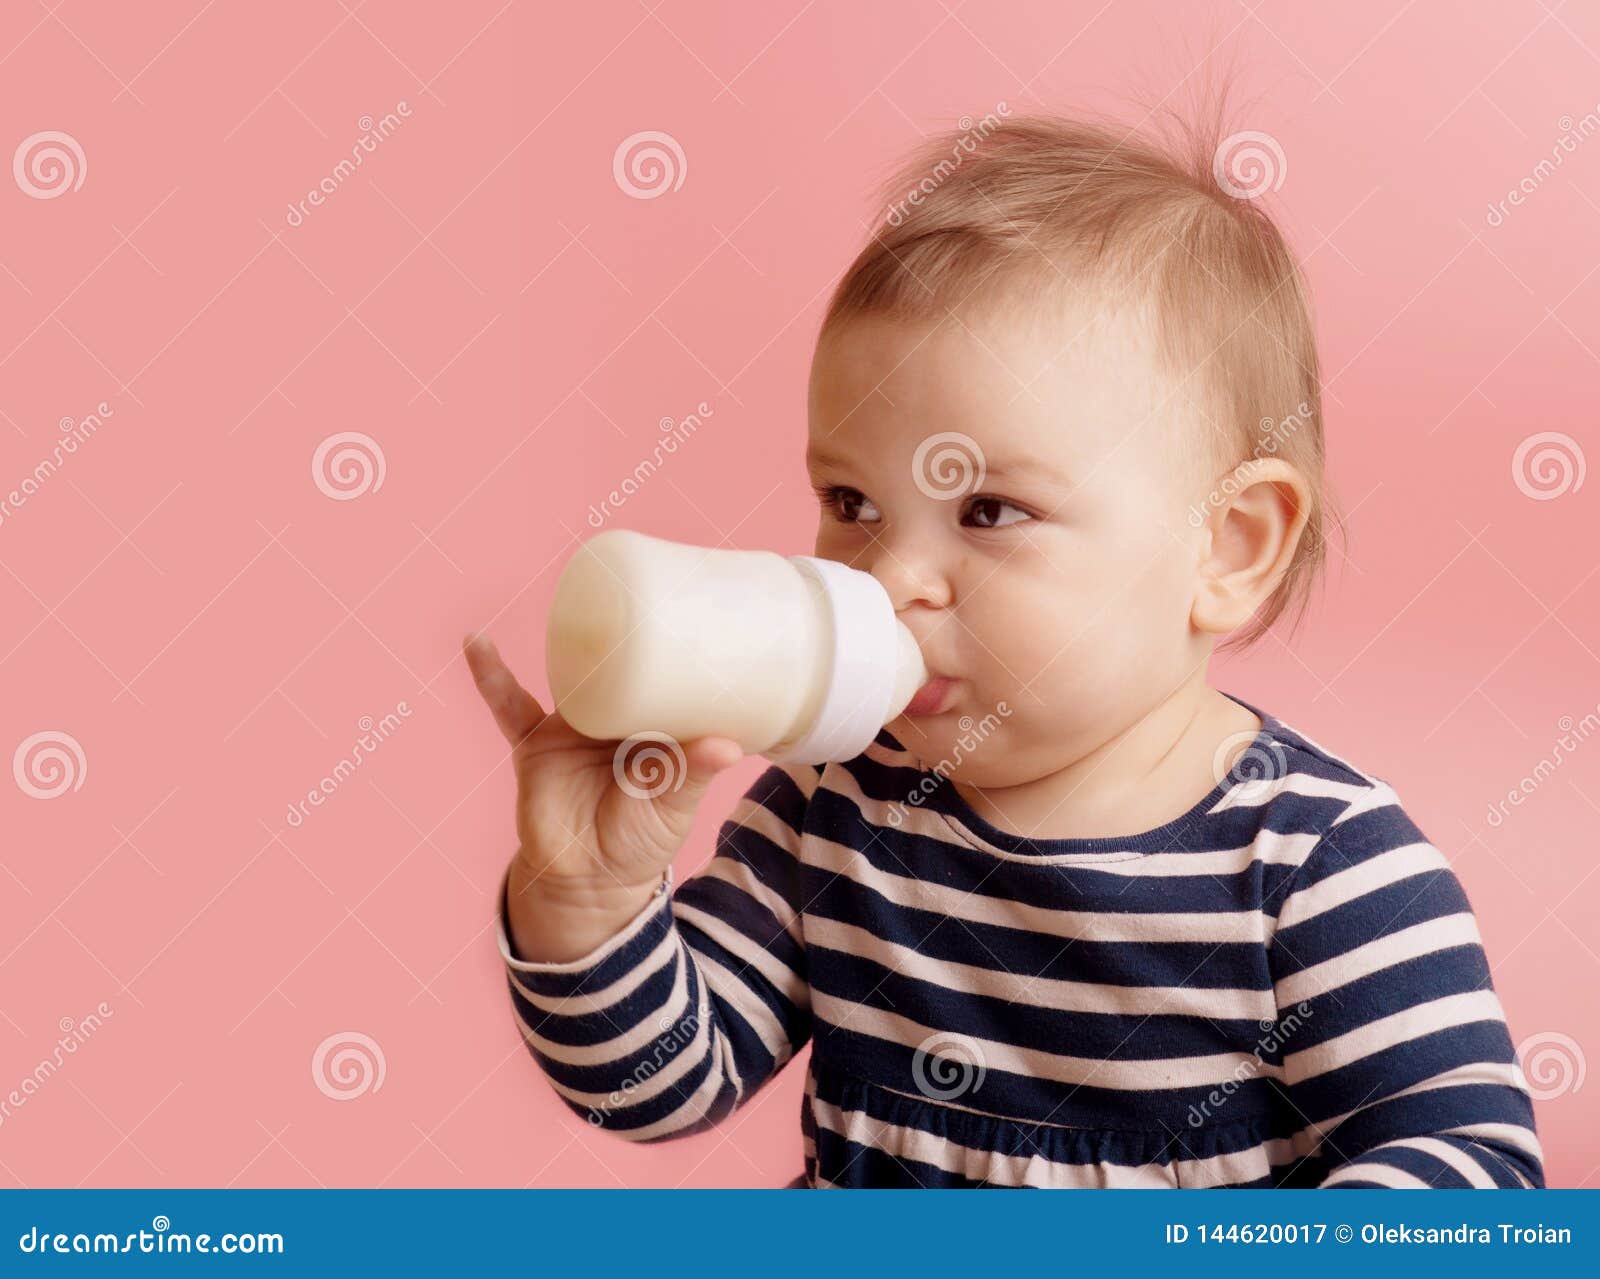 https://thumbs.dreamstime.com/z/portrait-cute-toddler-drinking-milk-bottle-one-year-old-food-concept-144620017.jpg